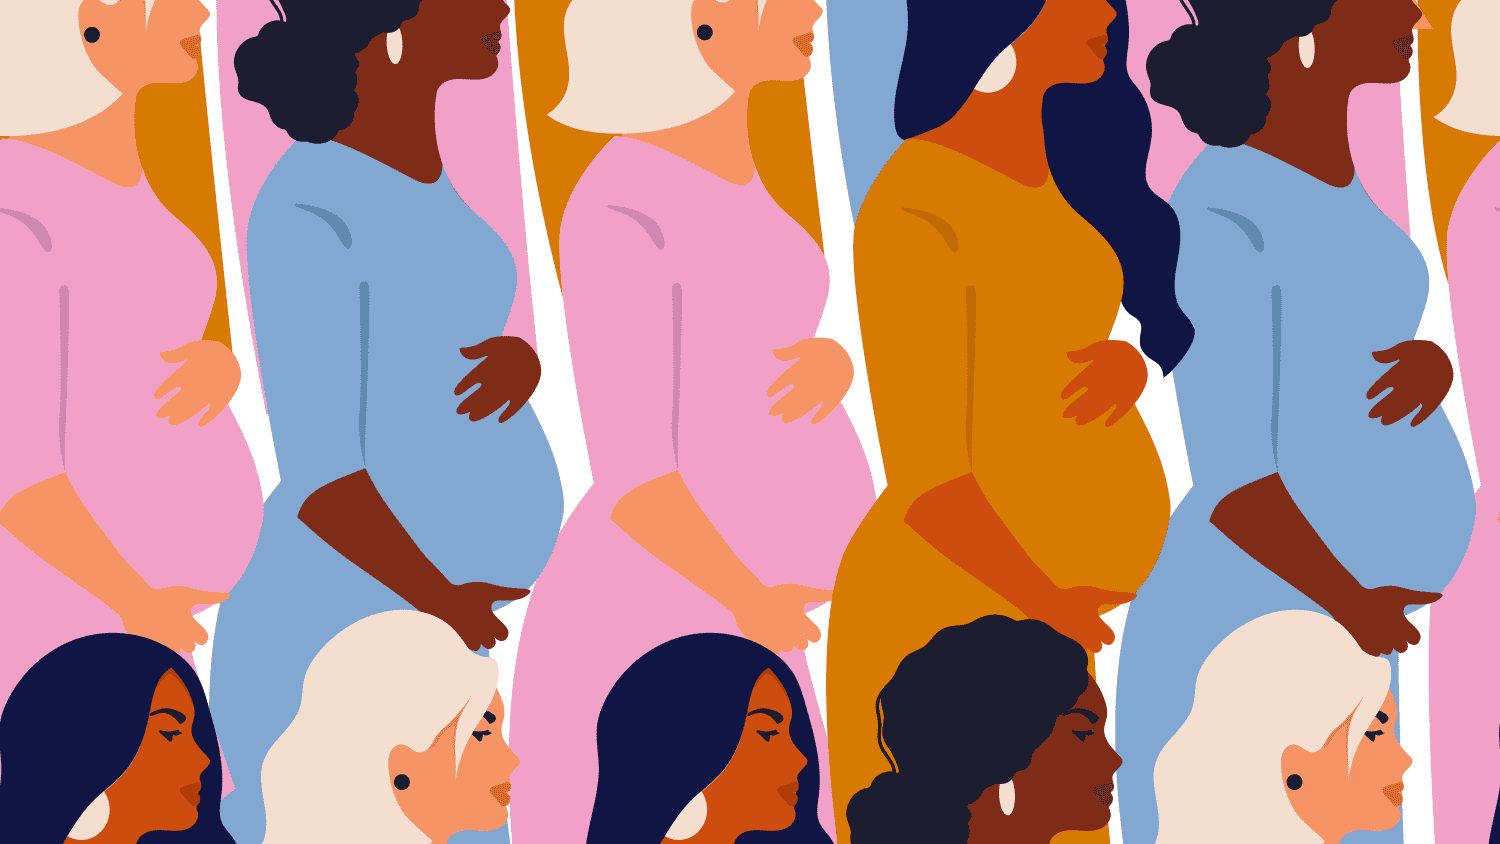 Illustration of a pattern with pregnant women, highlighting the uptick in maternal mortality